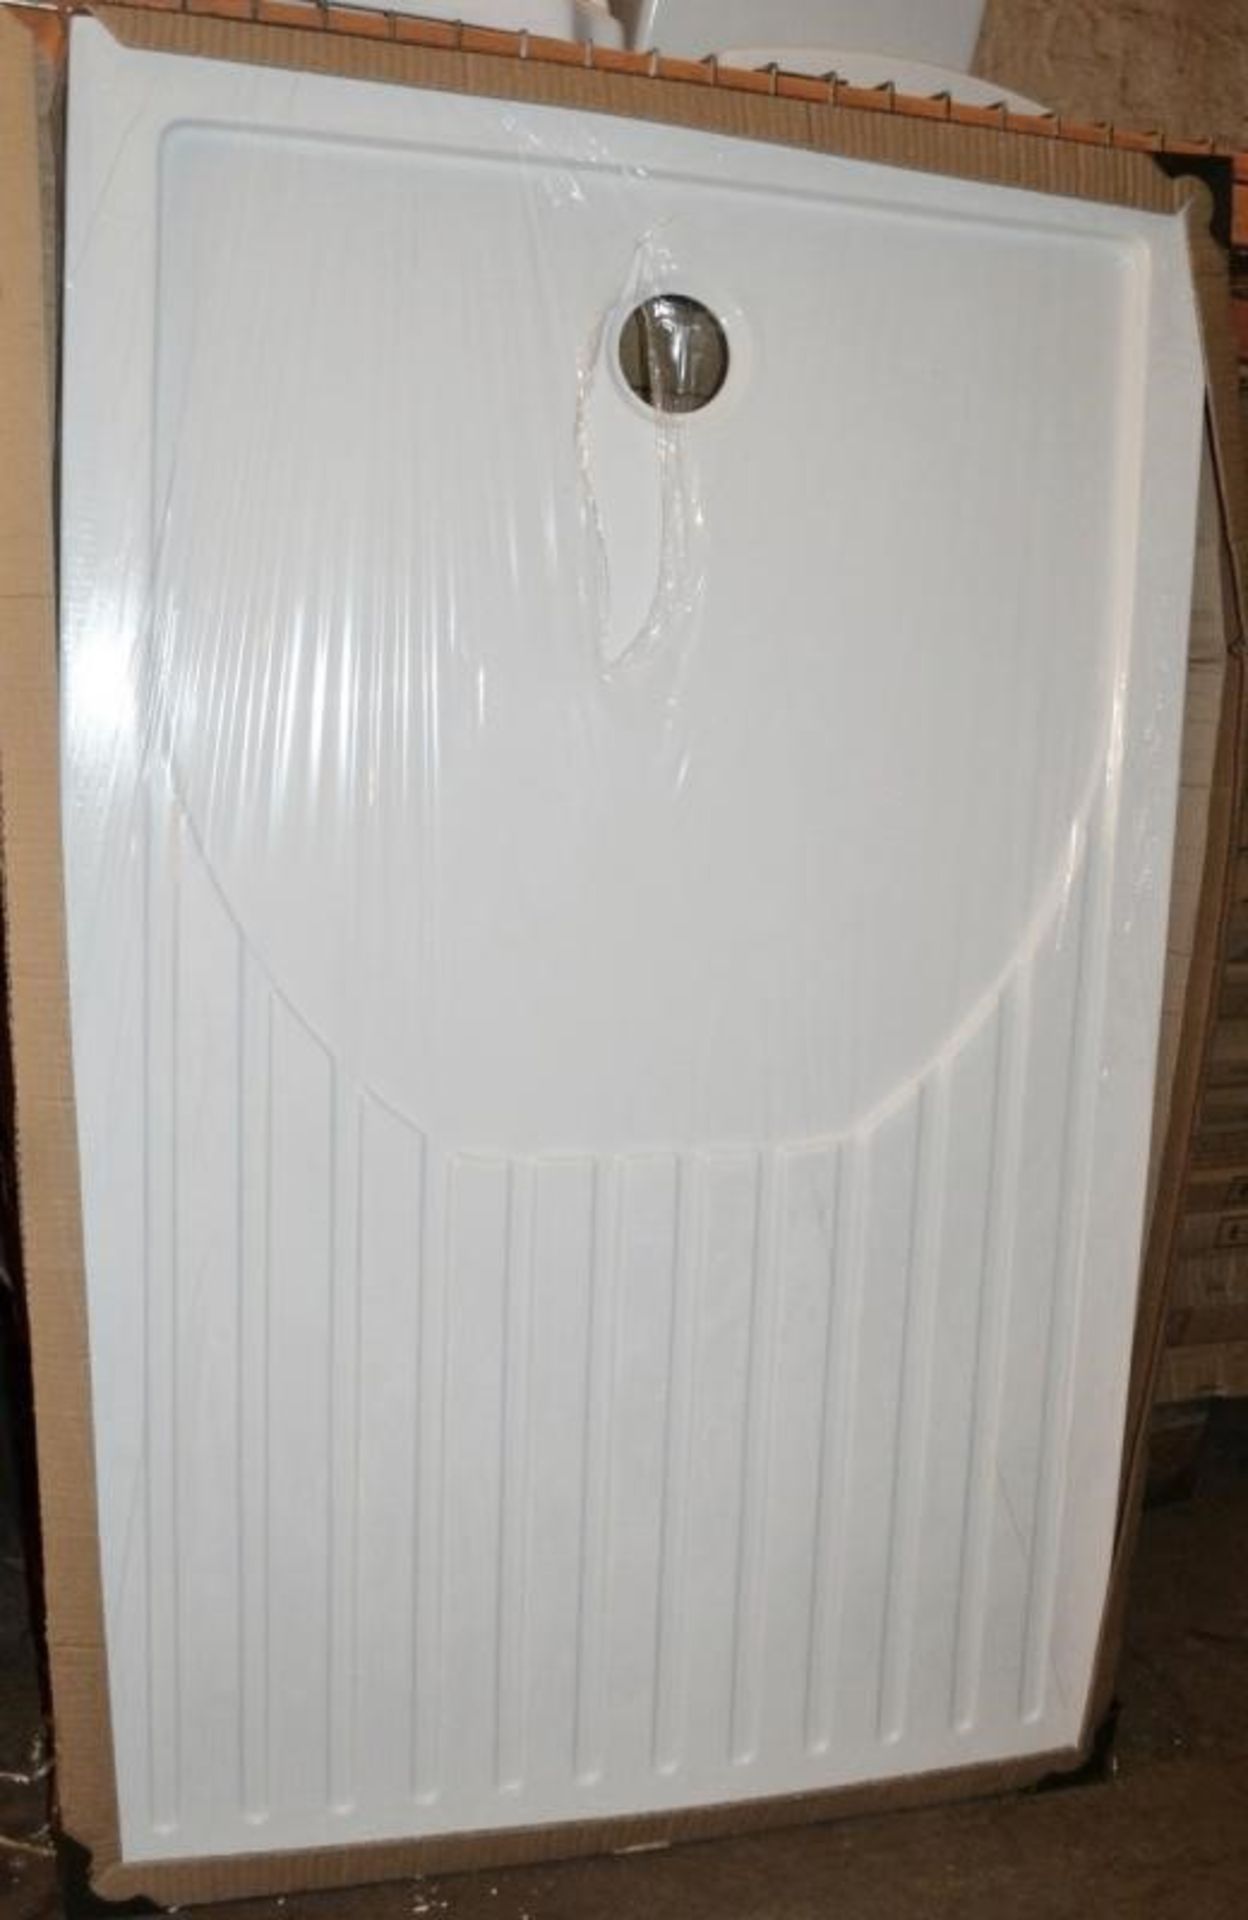 1 x Walk In Rectangular Shower Tray In White - Dimensions: 1400 x 900mm - New & Sealed Stock - CL269